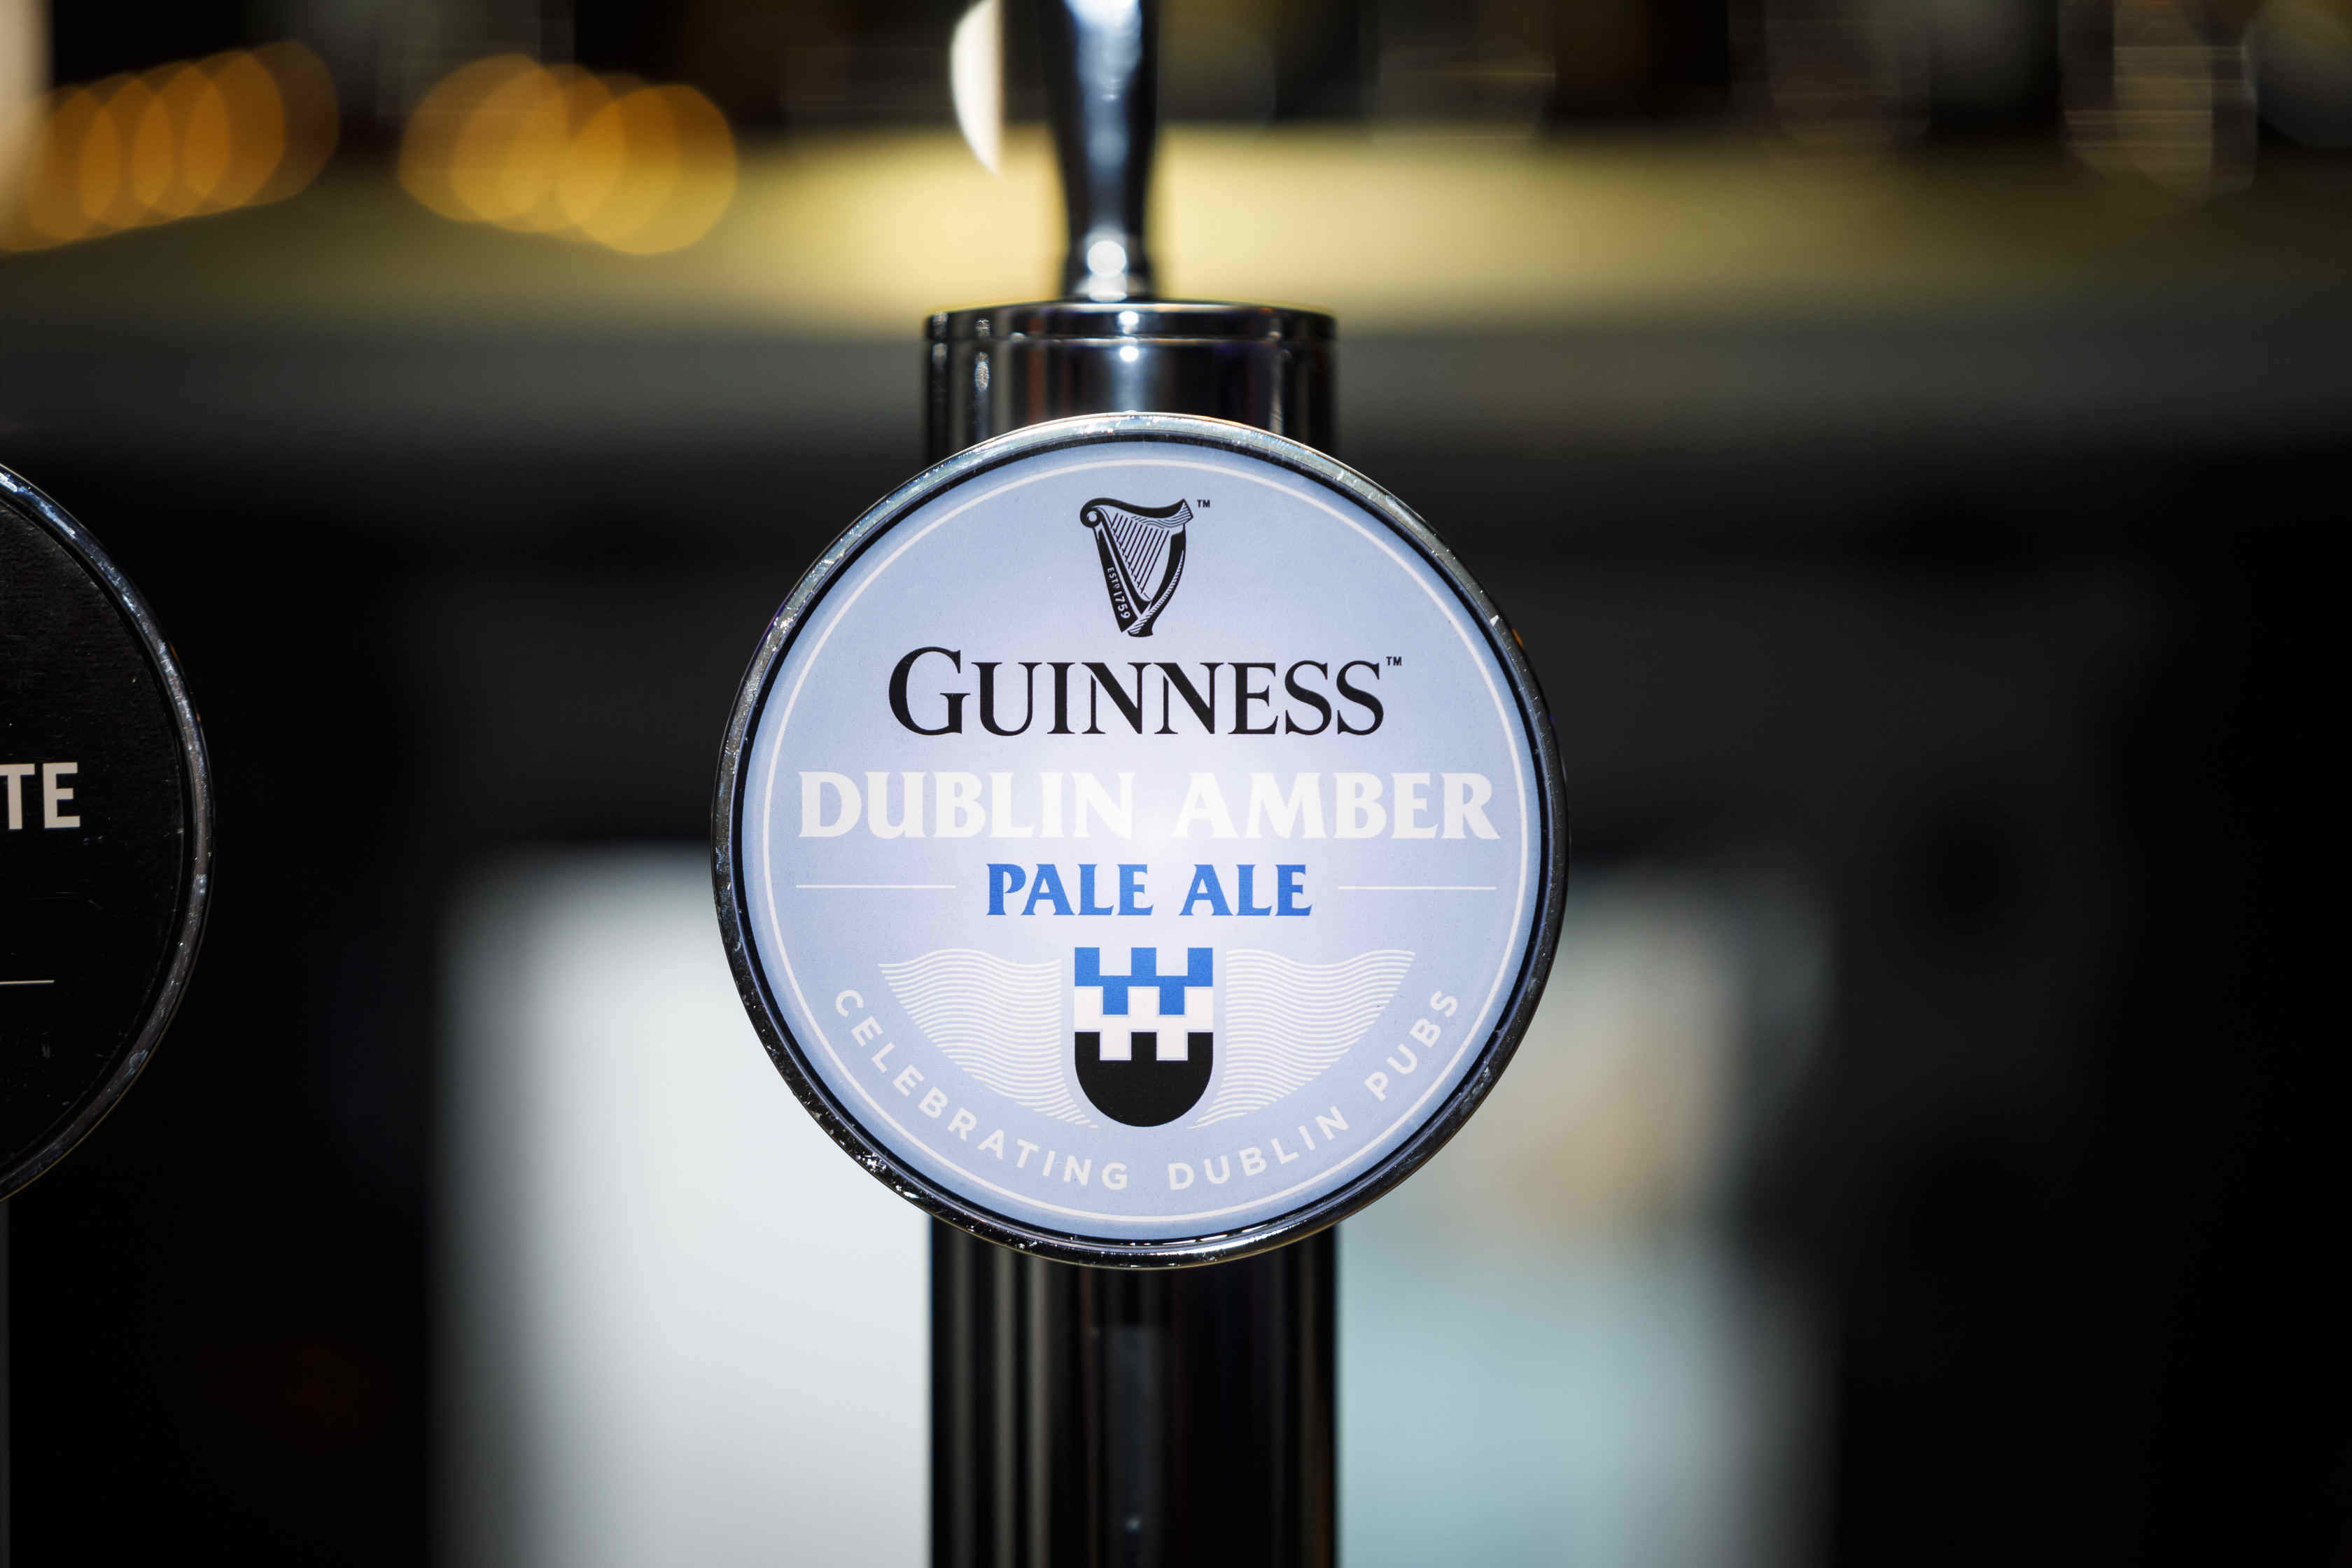 Guinness Dublin Amber Pale Ale has six varieties of hops, pine and citrus aromas and flavours, is nitrogen-infused for added smoothness and has a pleasant bitter finish.